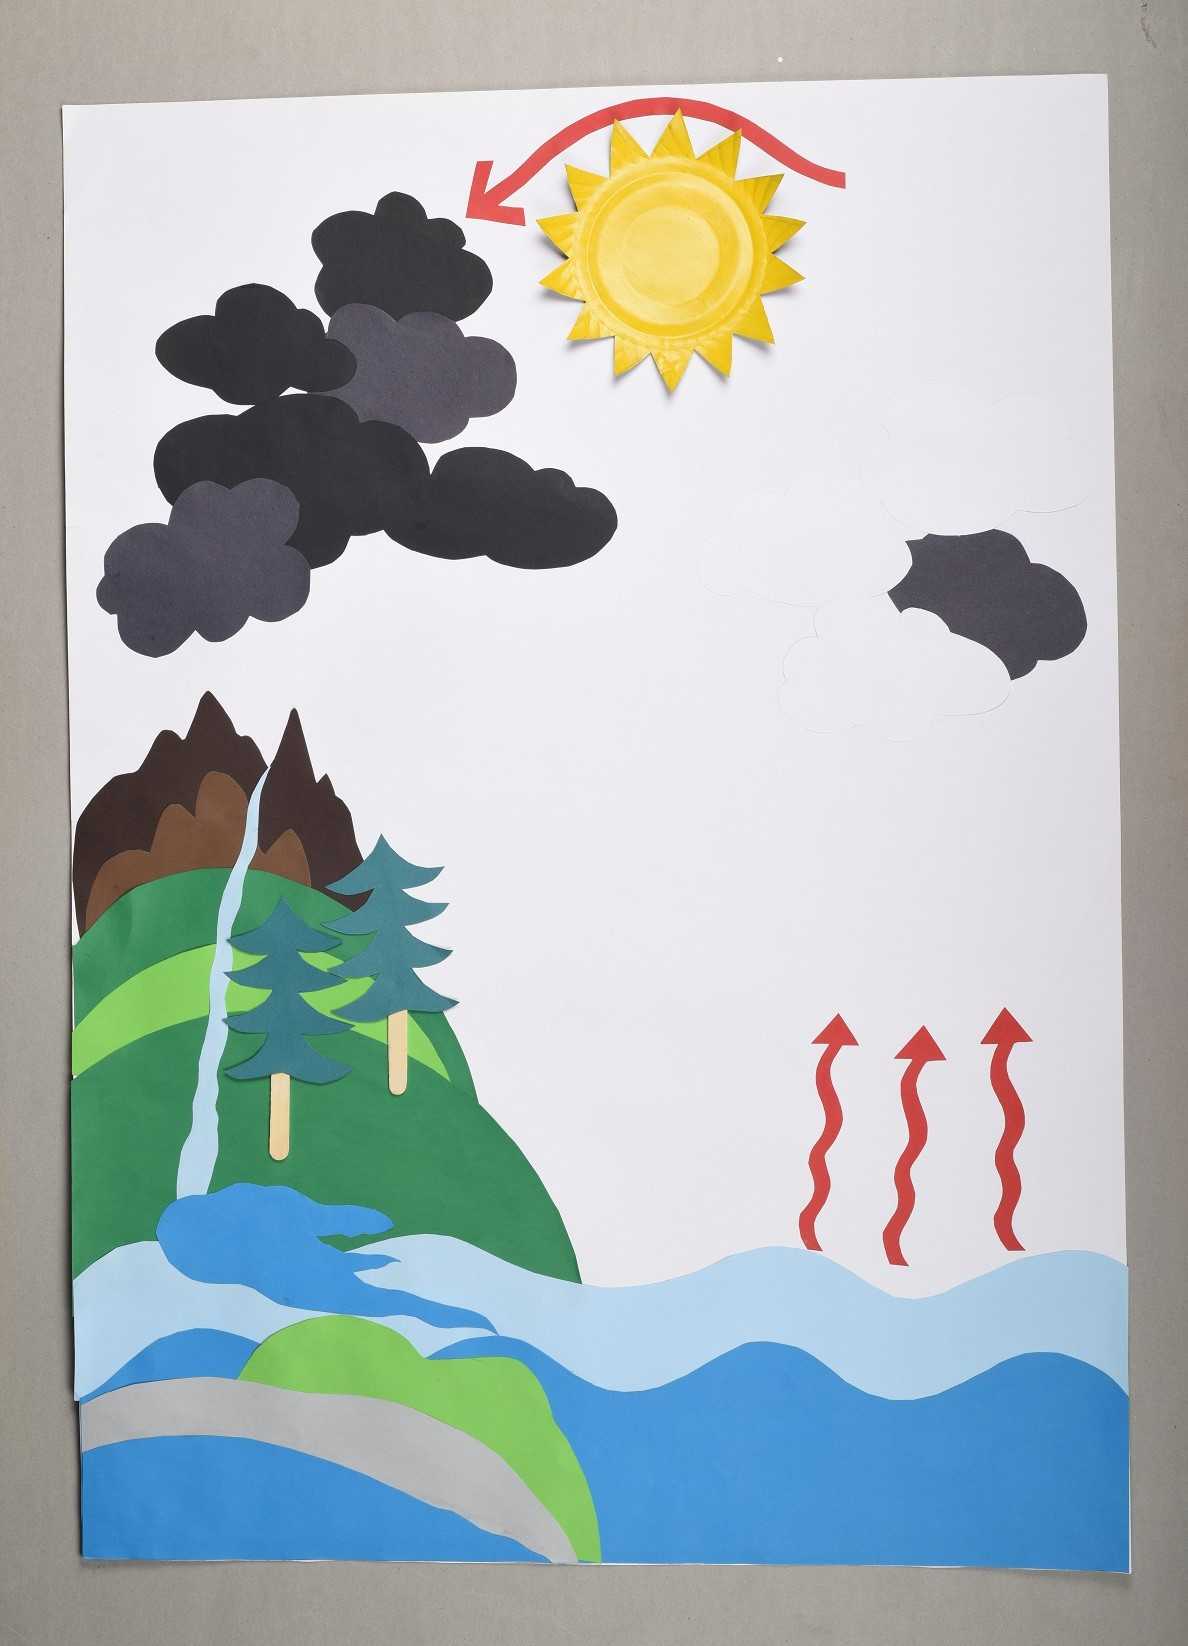 Water cycle science activity for kids to learn the science concepts